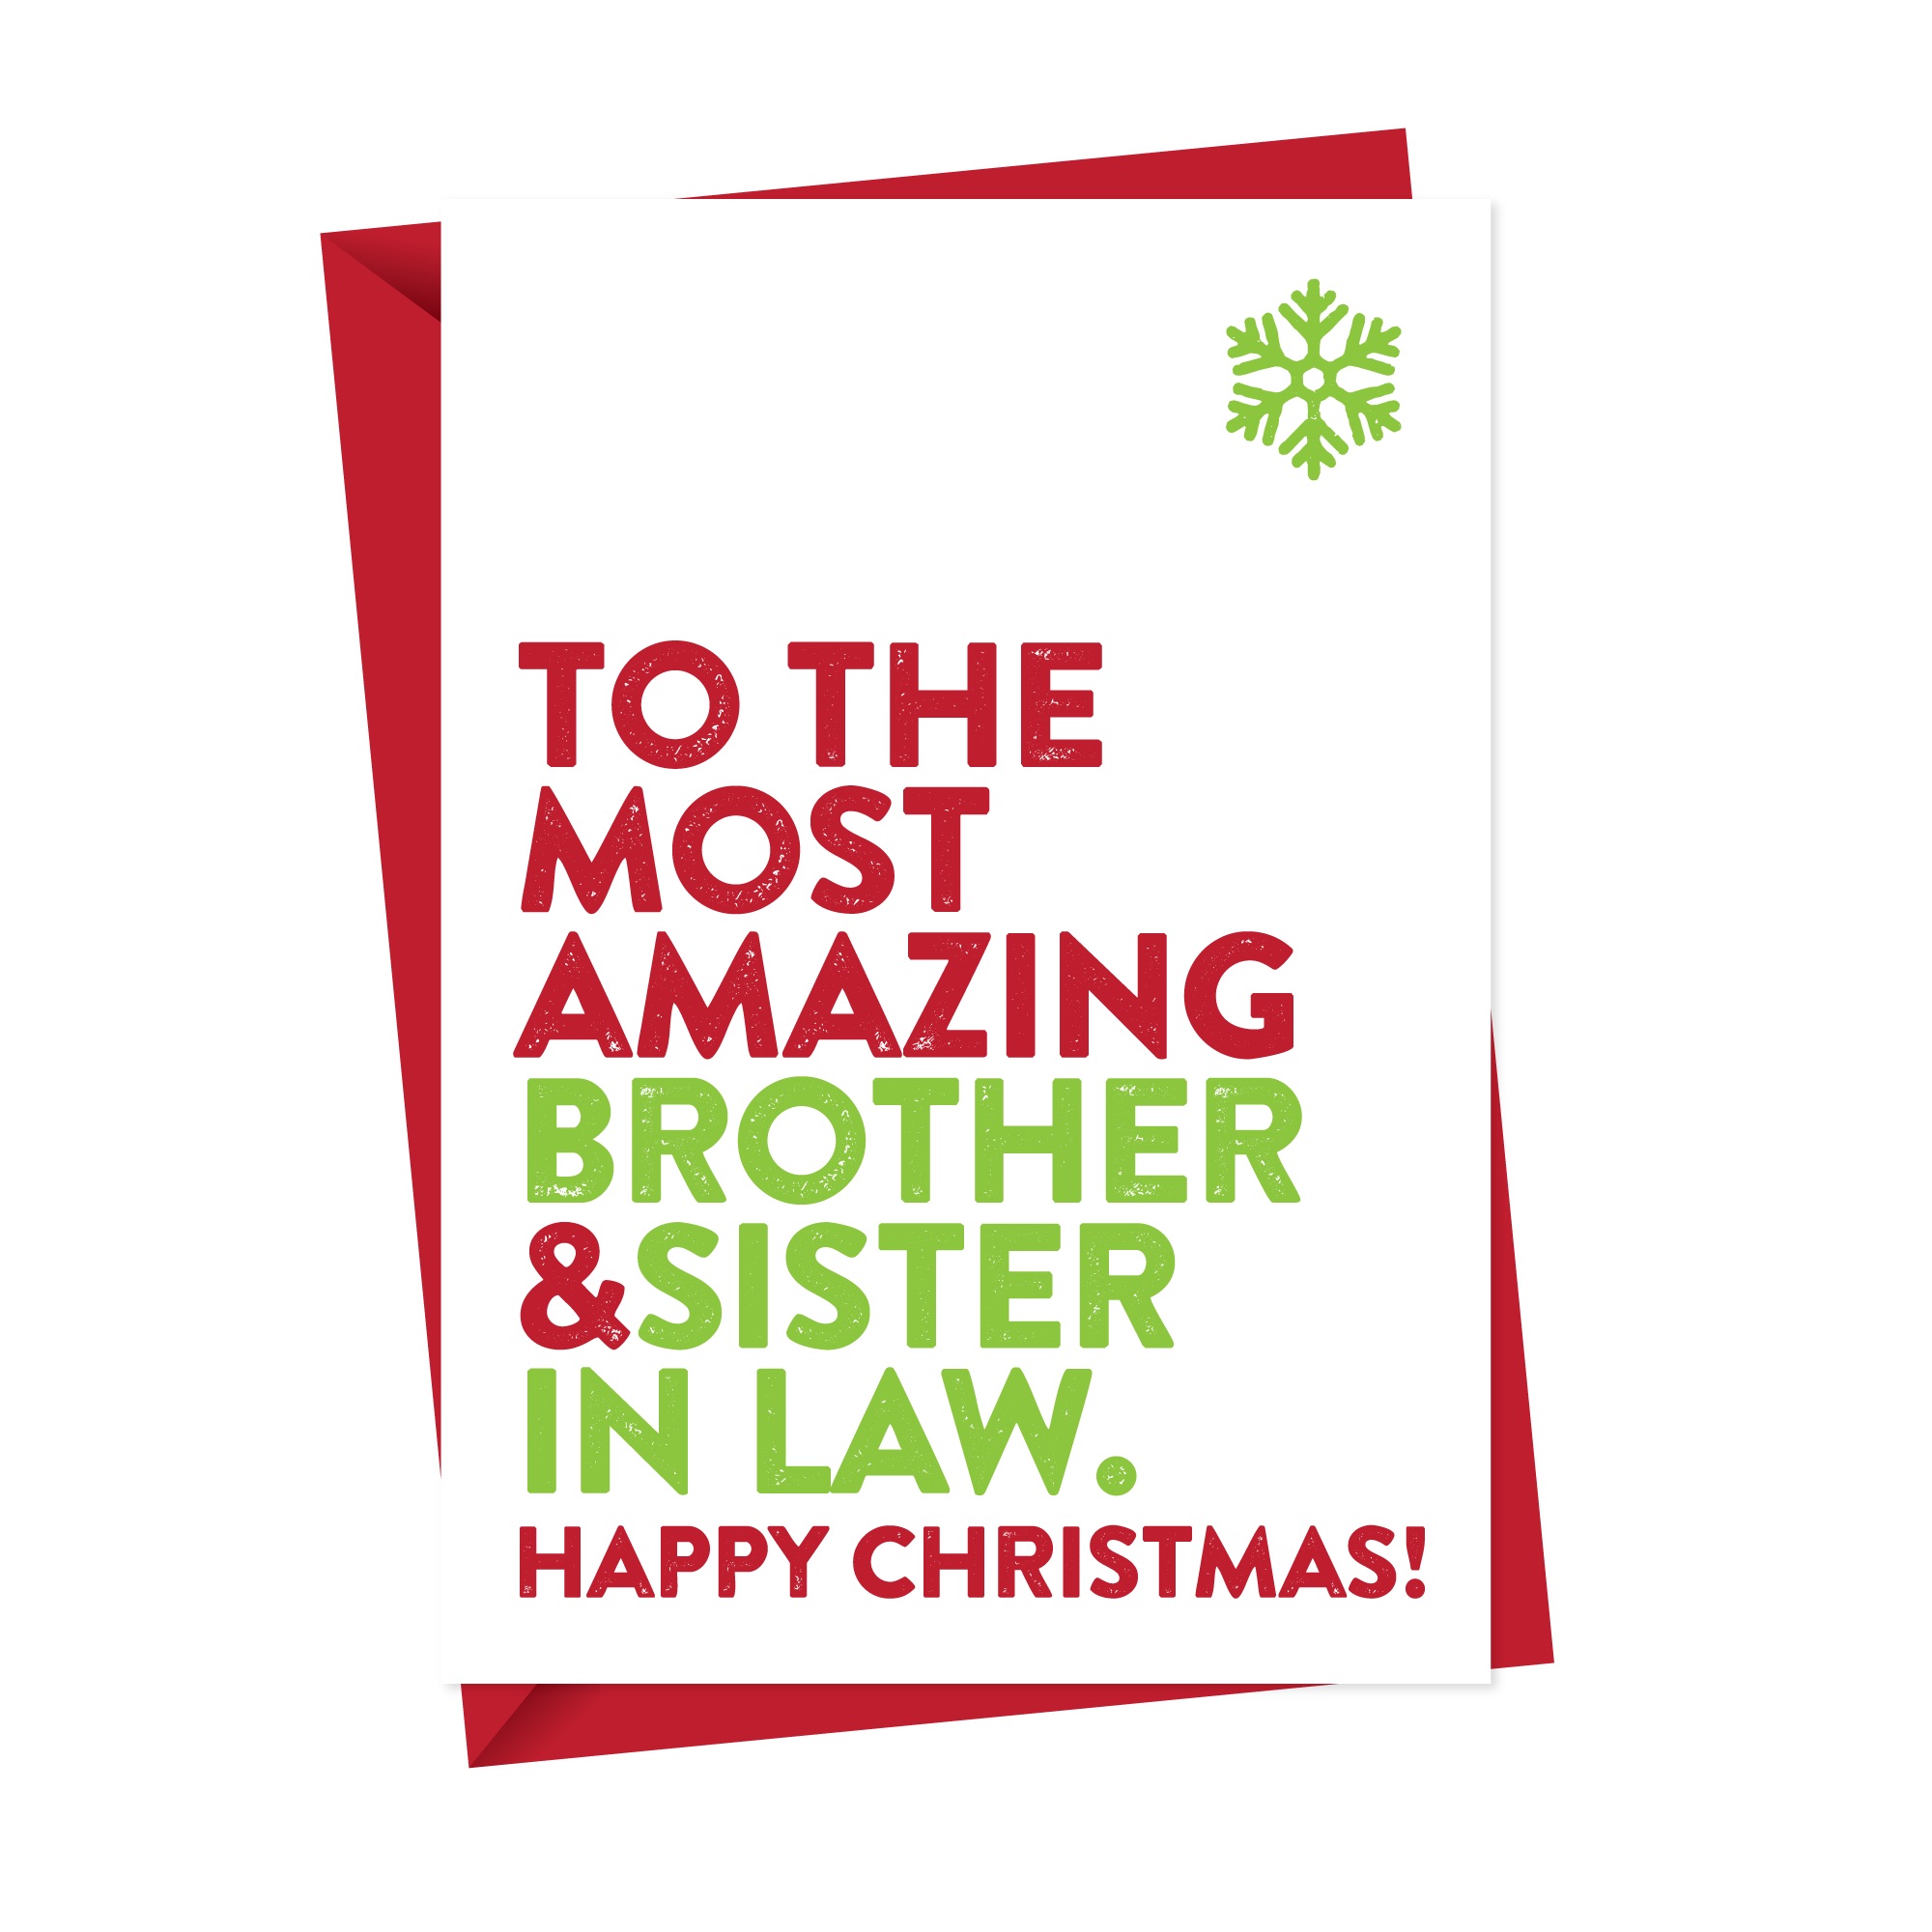 Most Amazing Brother&Sister in Law Christmas Card